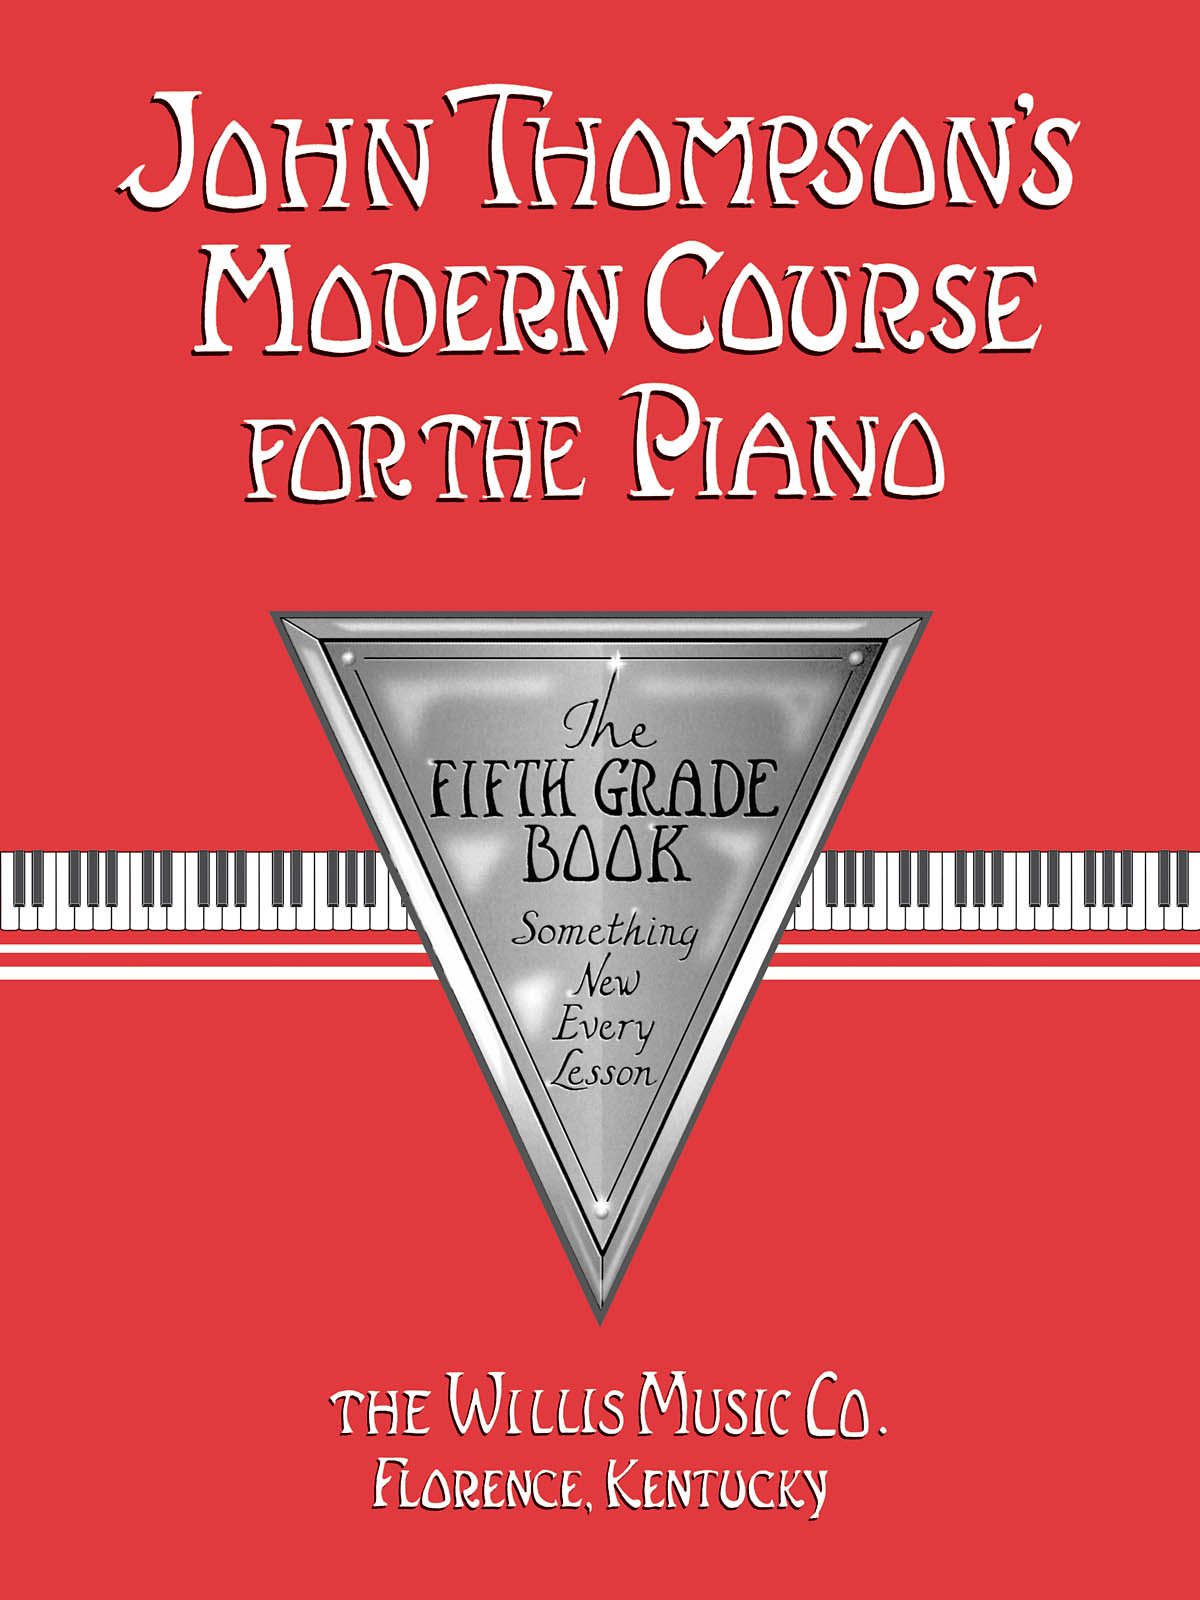 John Thompson: Modern Course For The Piano 5